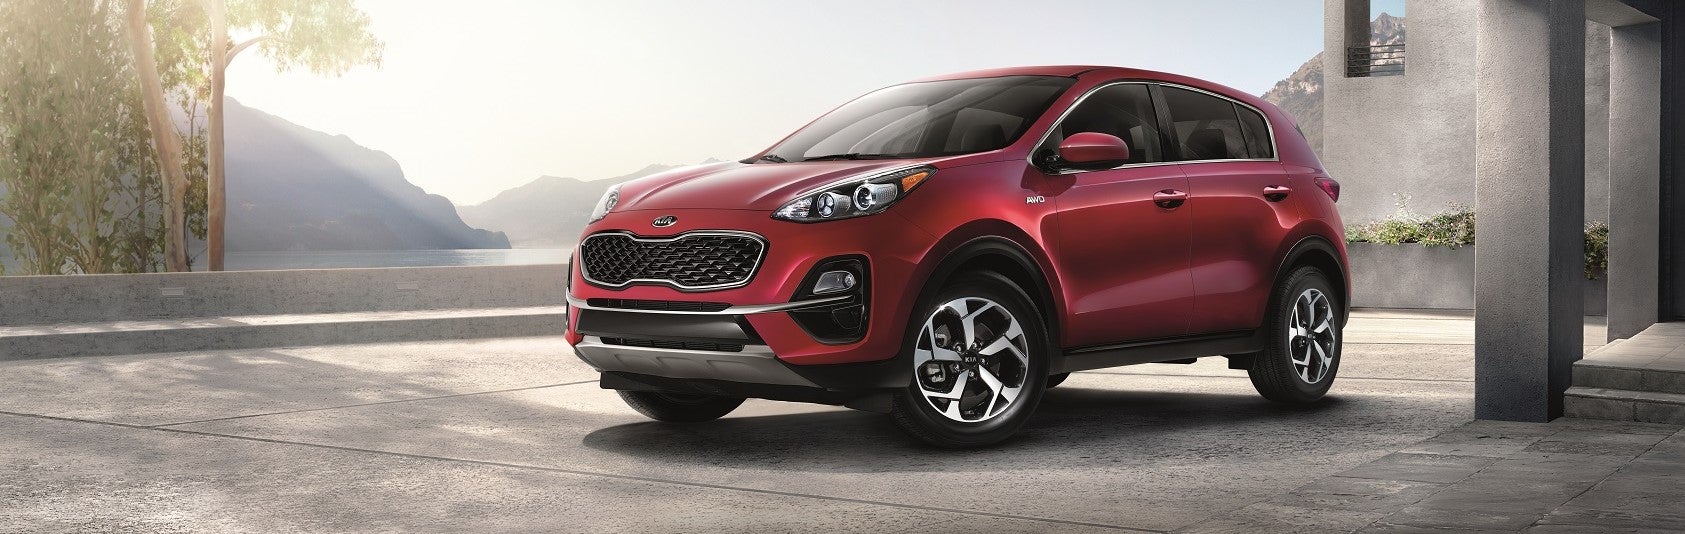 Kia Vehicle Reviews West Chester PA